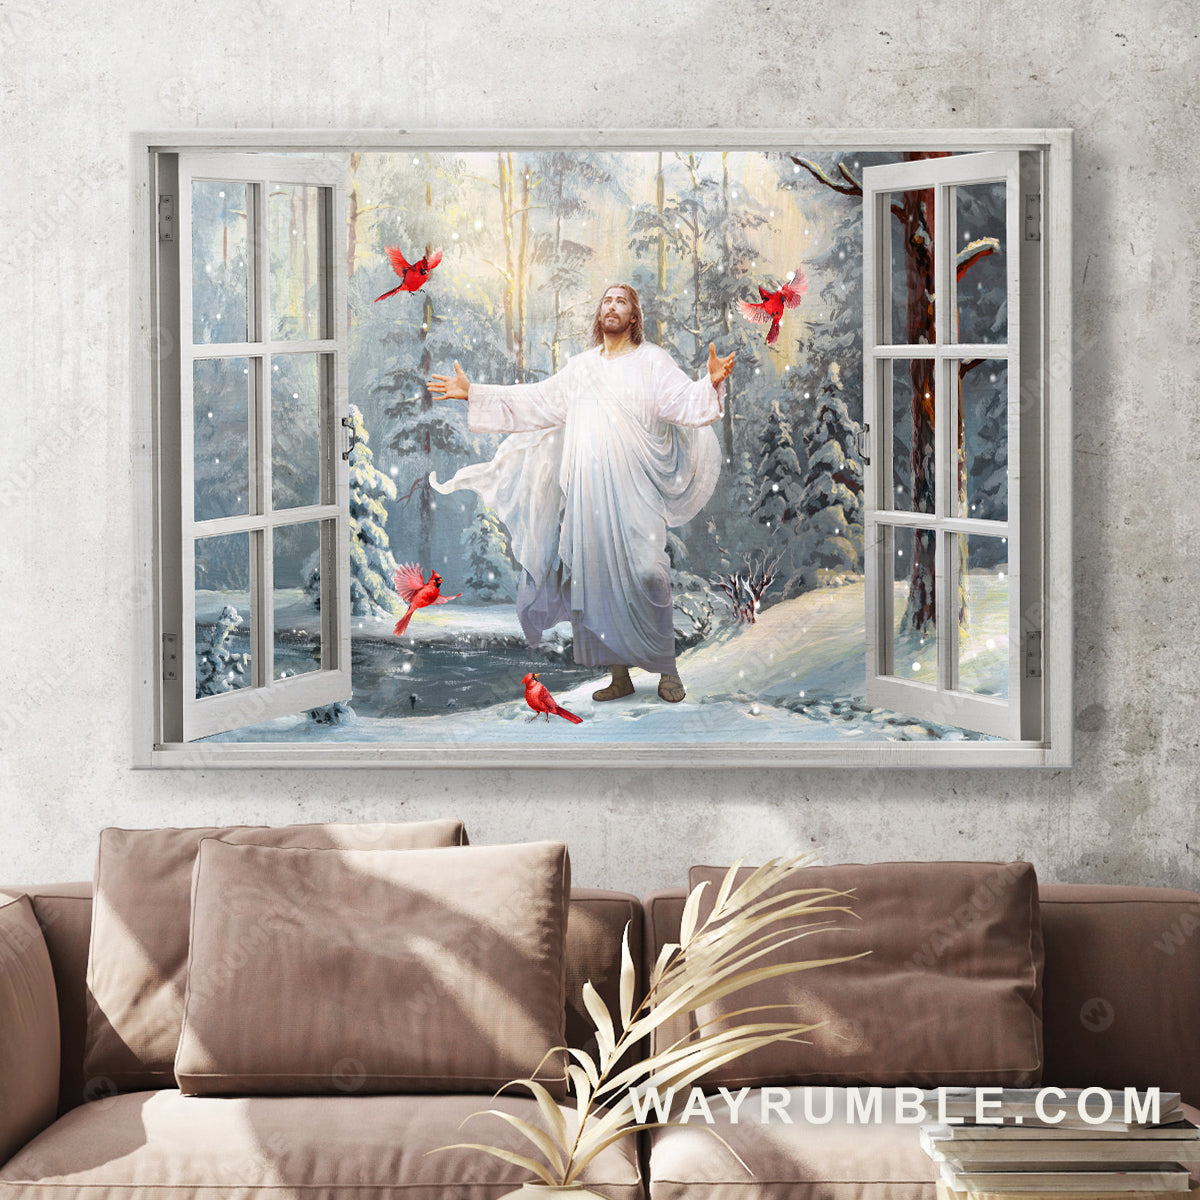 Jesus painting, Cardinal painting, Walking with Jesus, Into the winter forest - Jesus, Window frame Landscape Canvas Prints, Wall Art